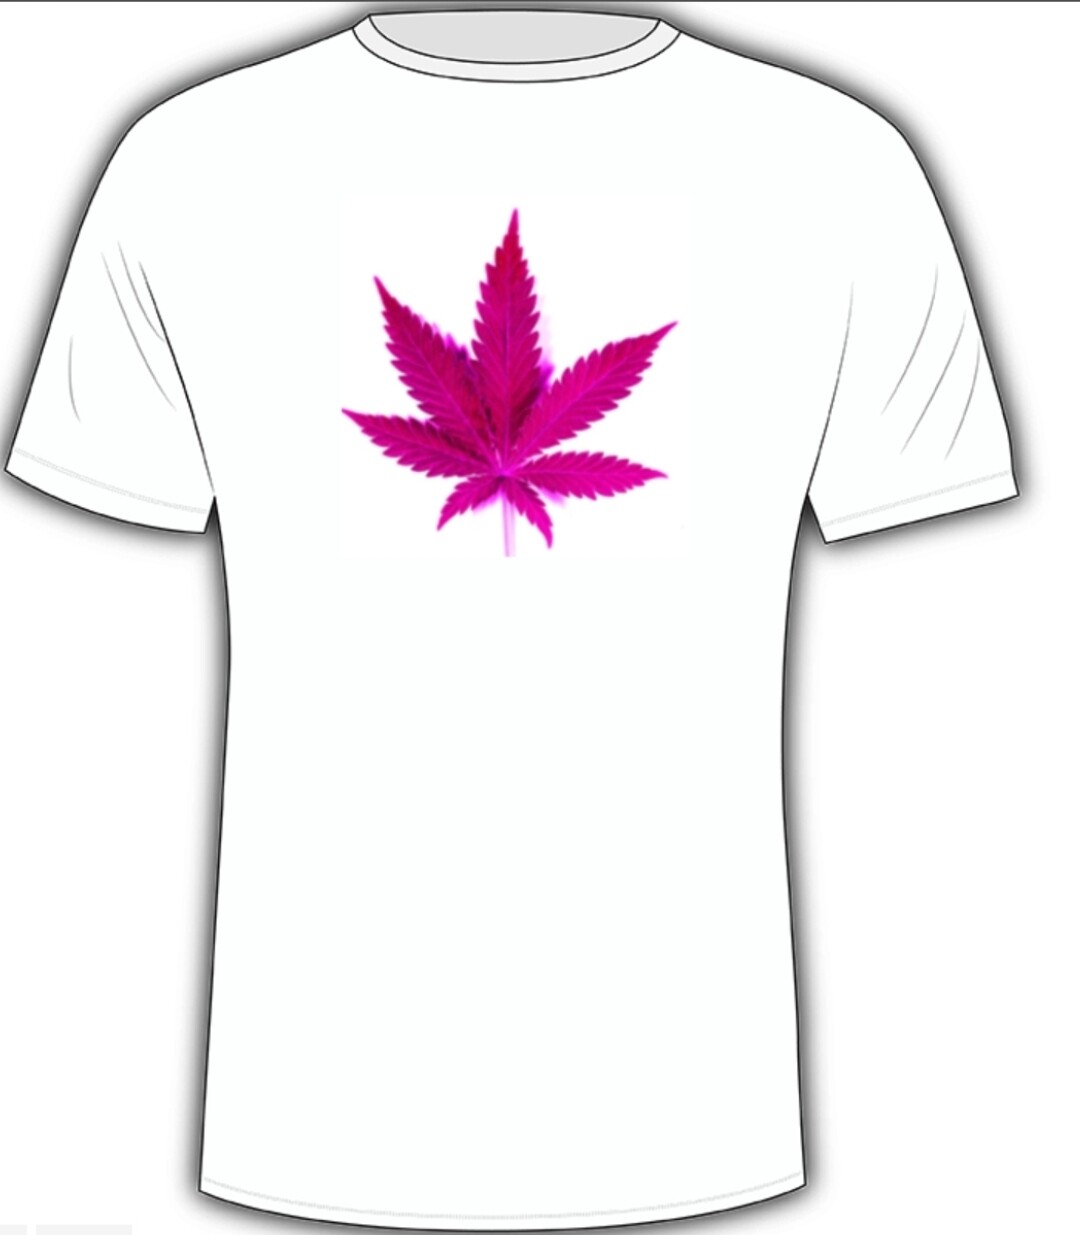 Pink leaf   80/20 cotton  poly blend slight faded look